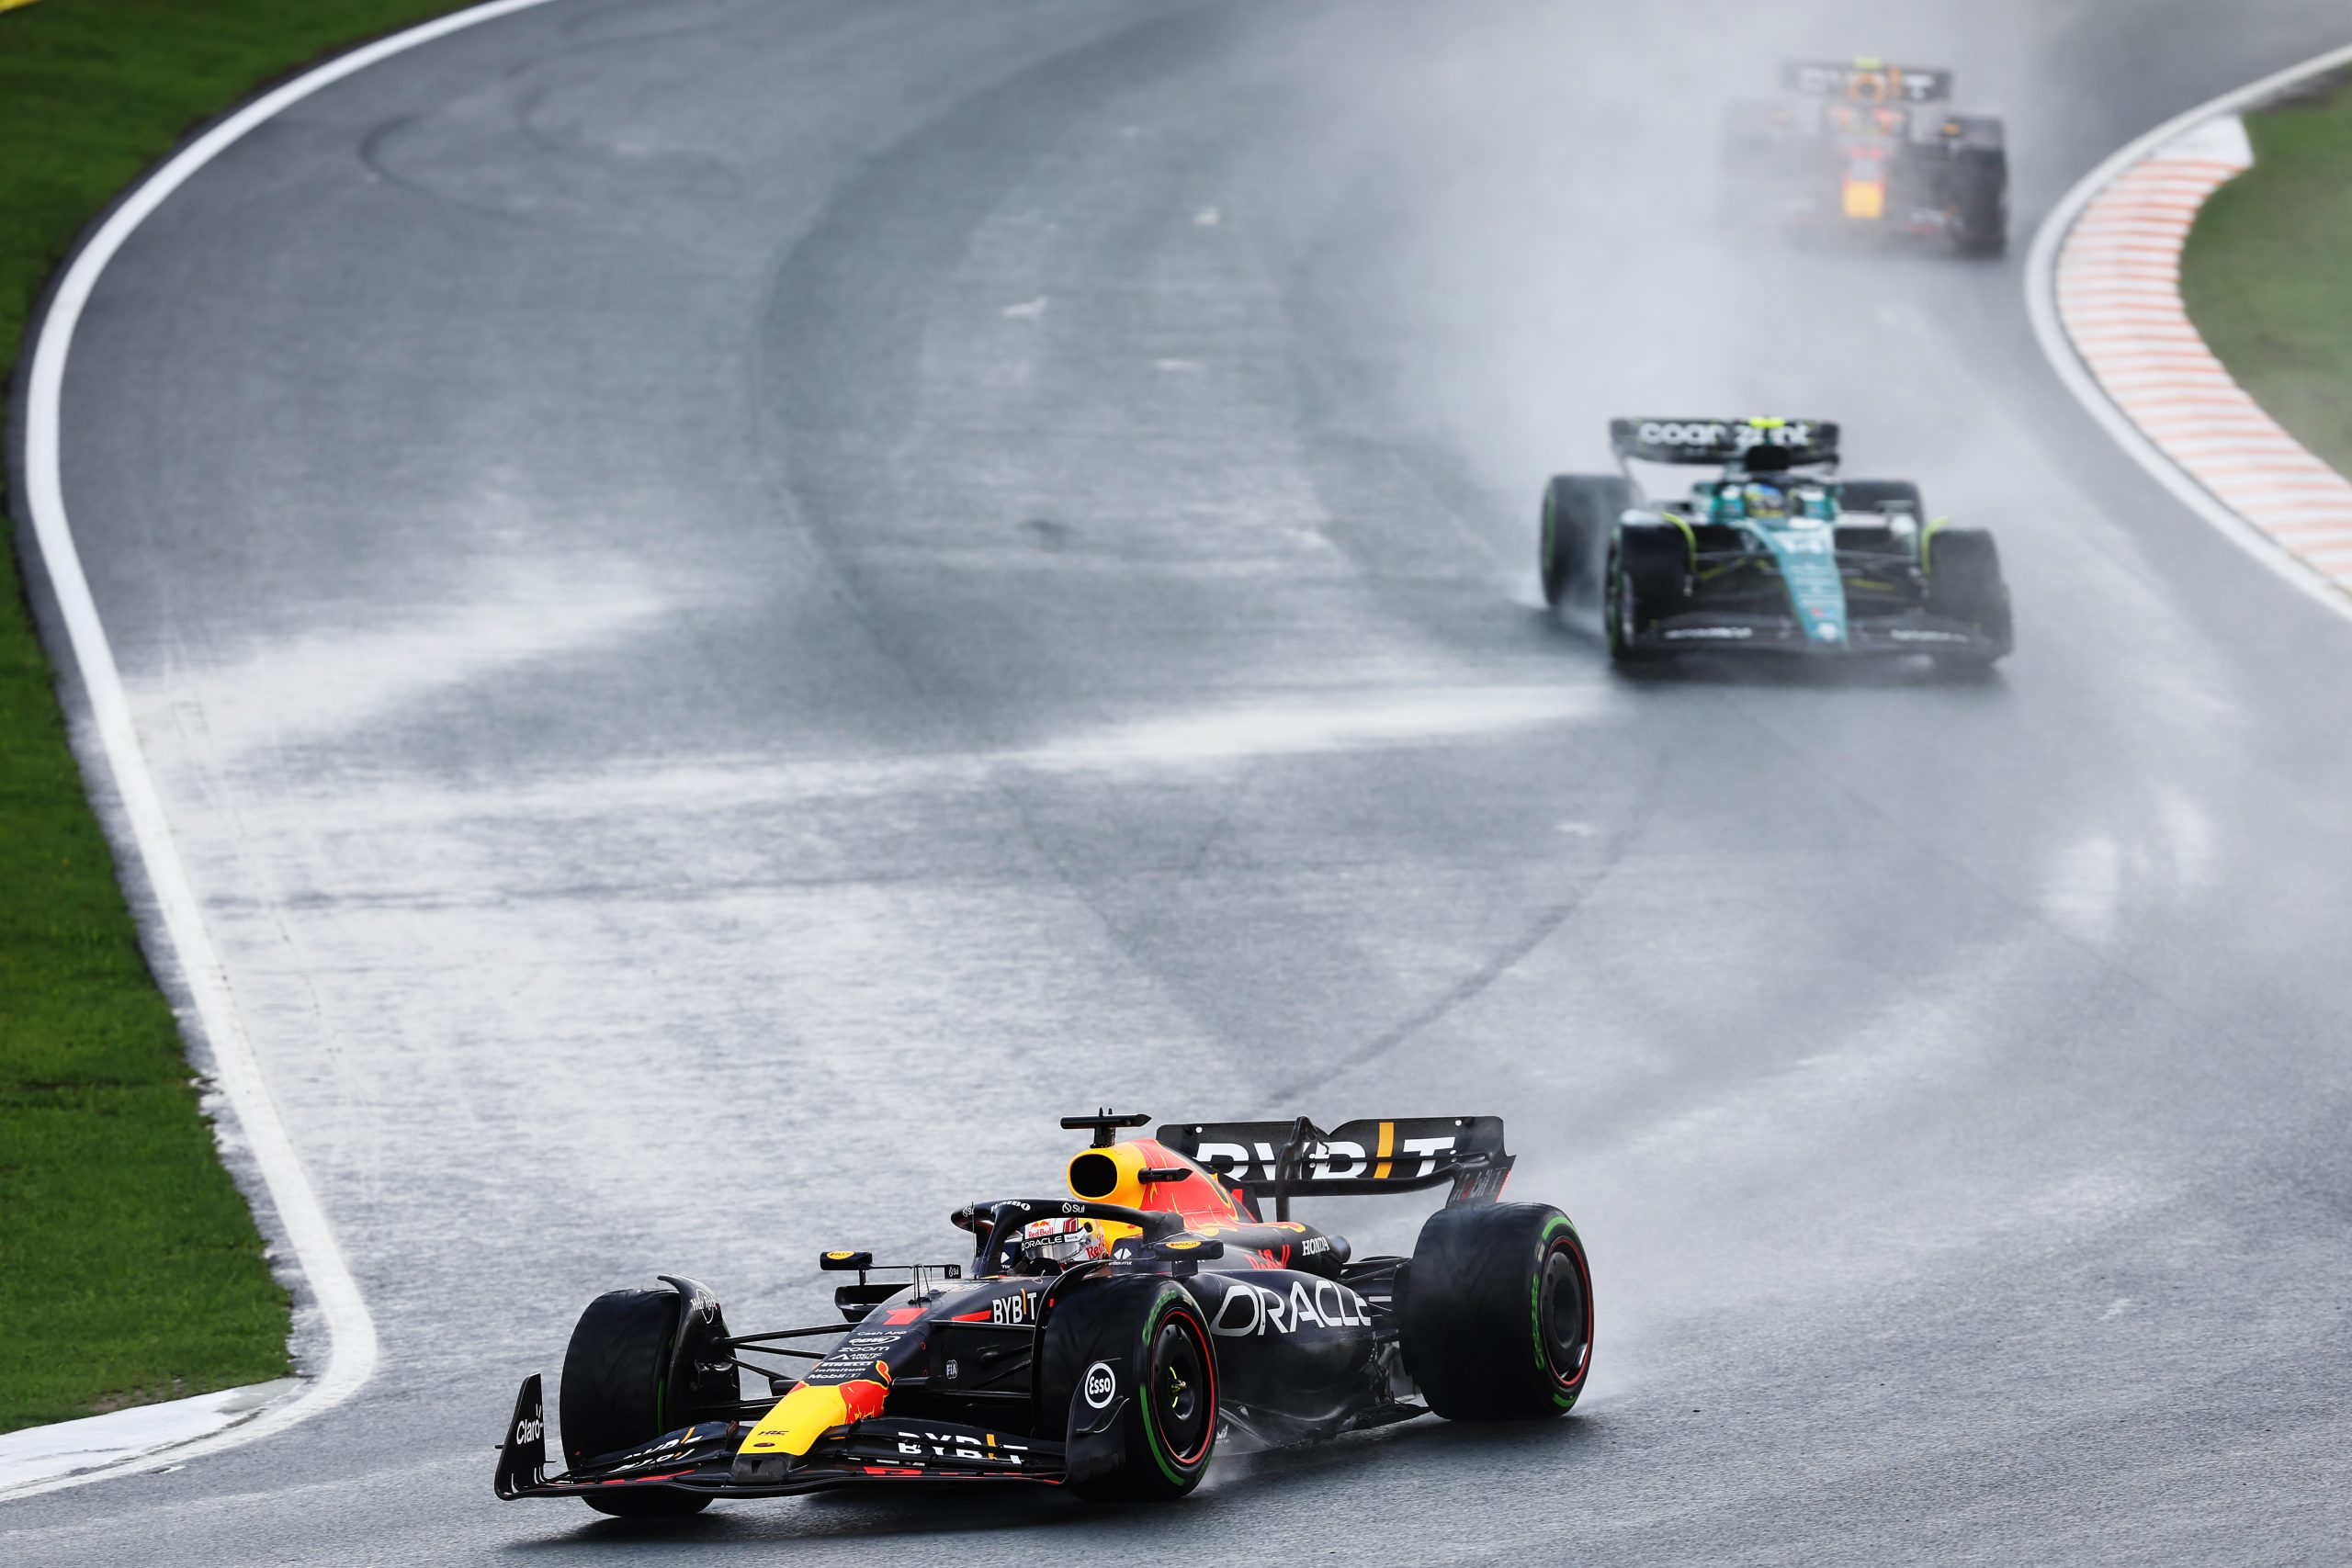 Max Verstappen (1) leads in his Red Bull over Fernando Alonso (14) and Red Bull teammate Sergio Perez (11) in the closing stages of the Dutch Grand Prix at the Circuit Zandvoort.